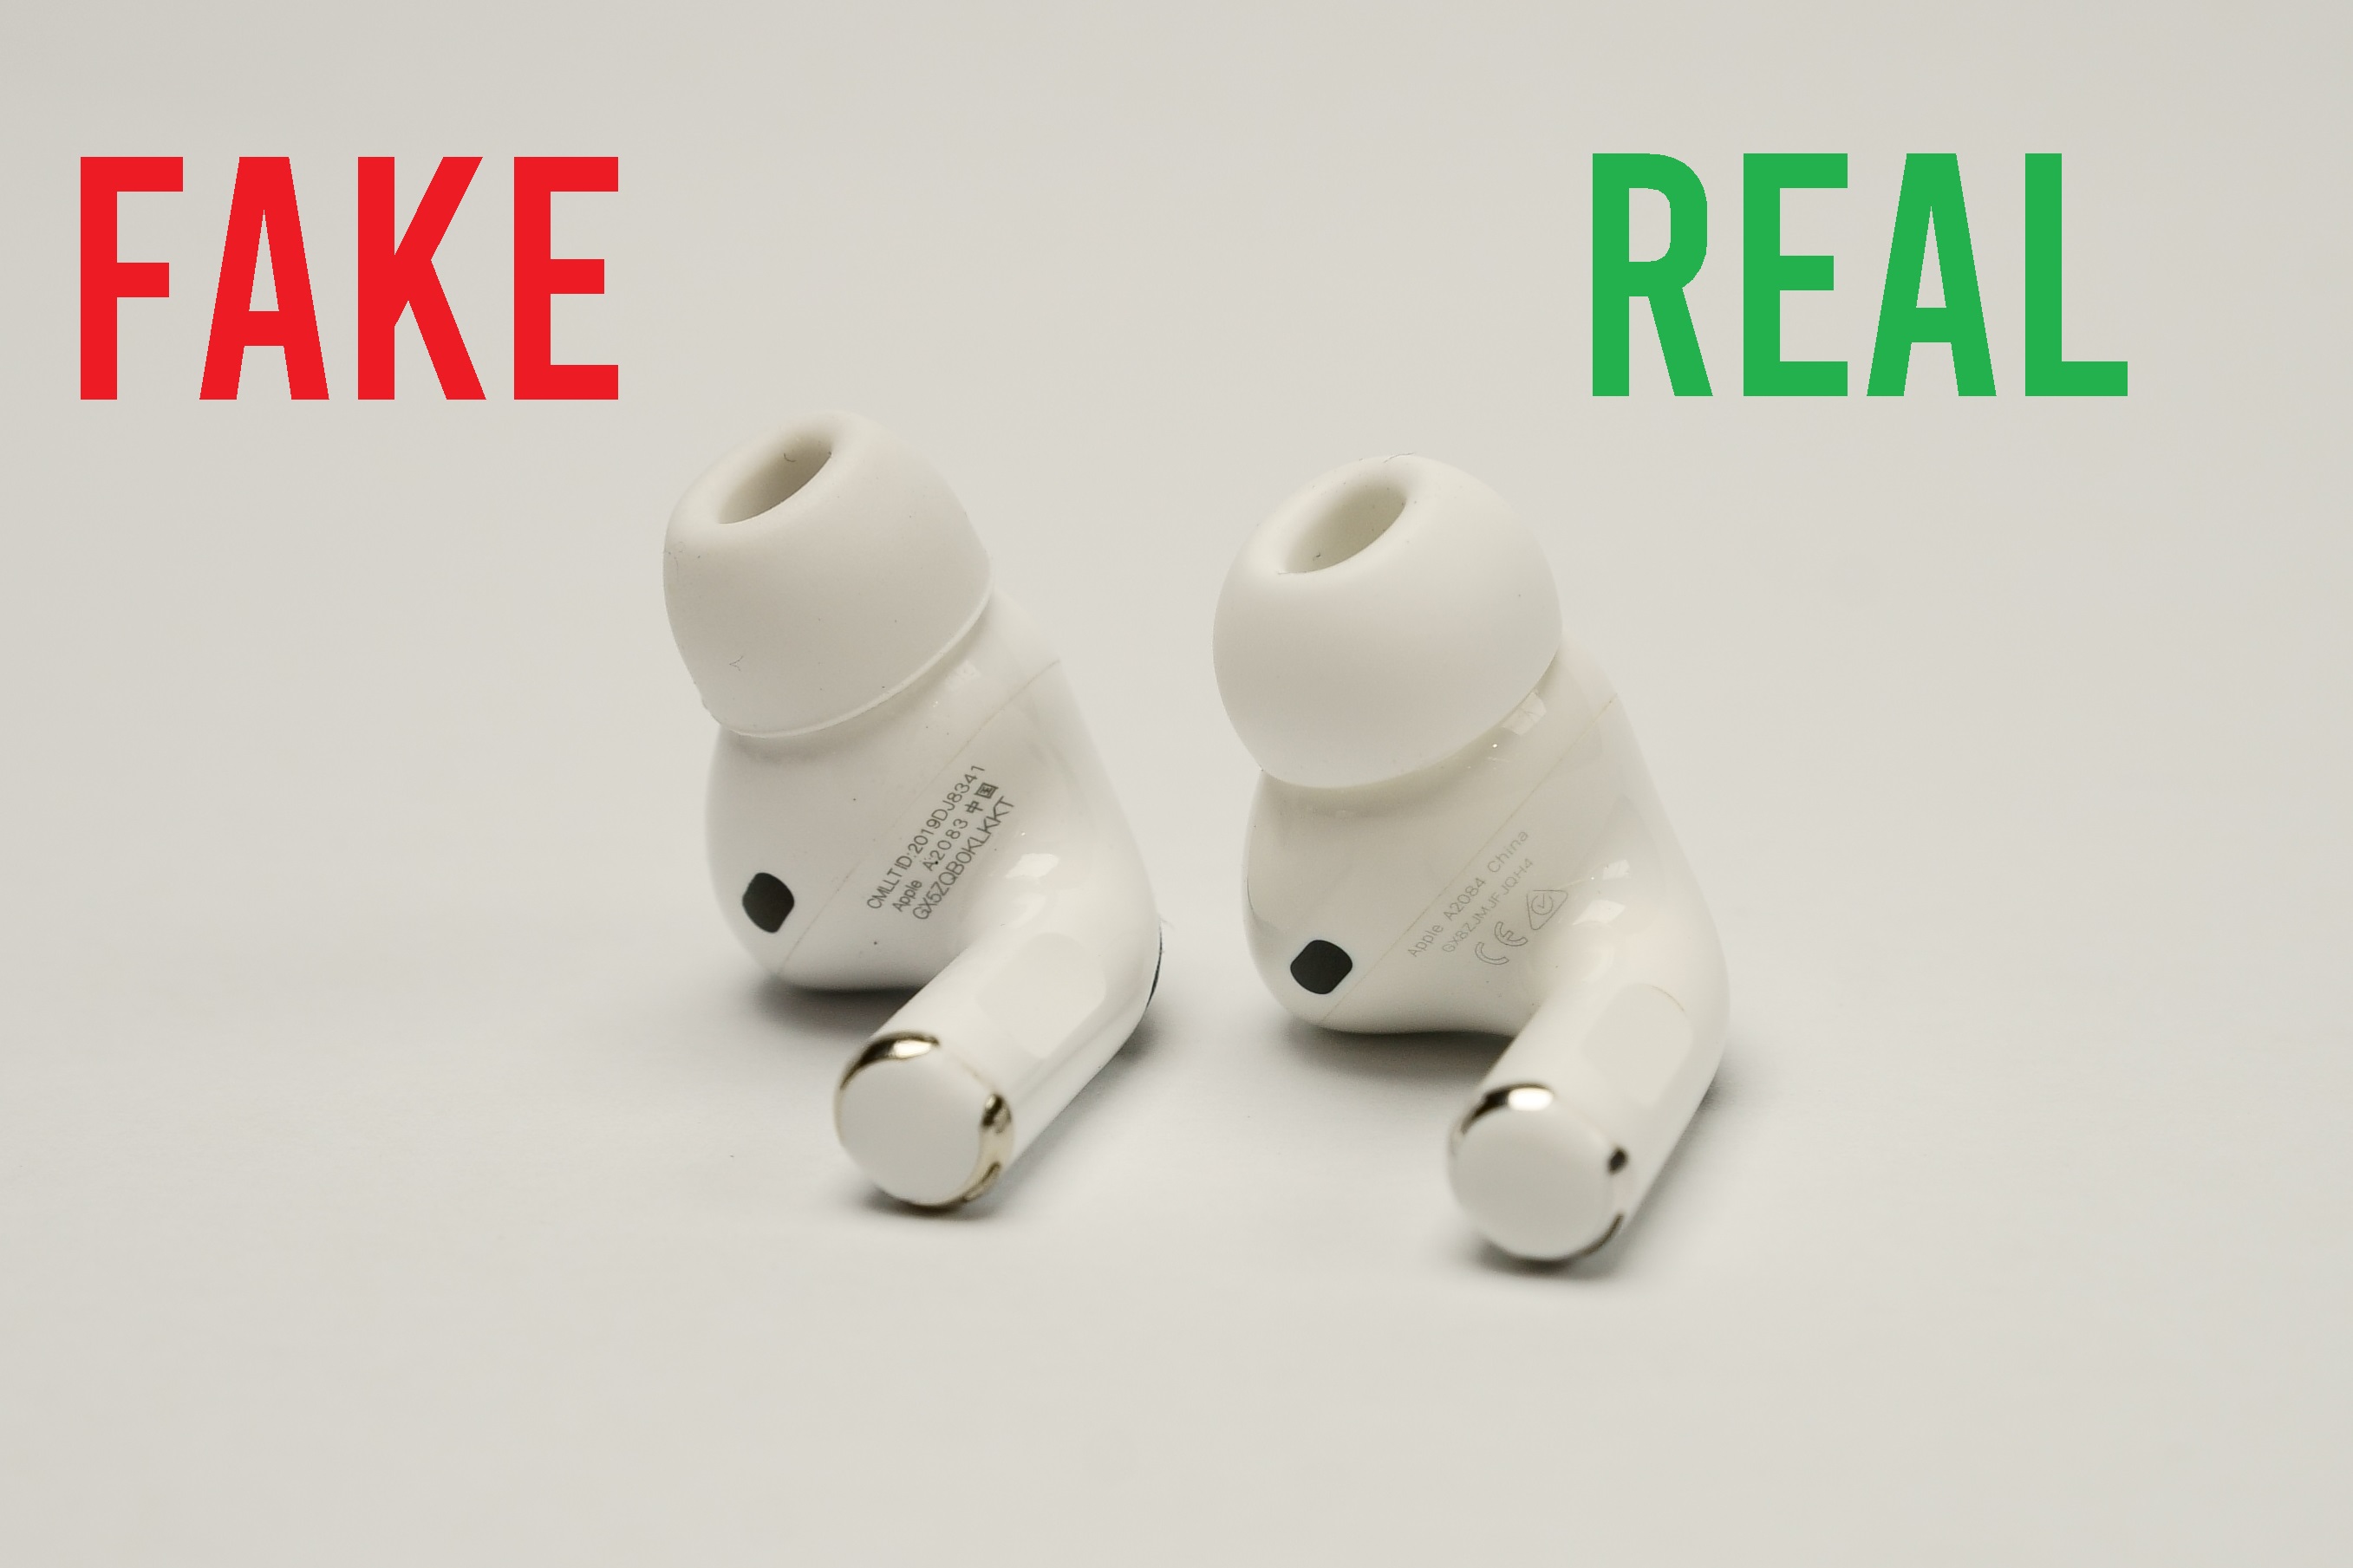 Spotting Counterfeit Airpods Pro Real Vs Fake Comparison Hybrid Hardware